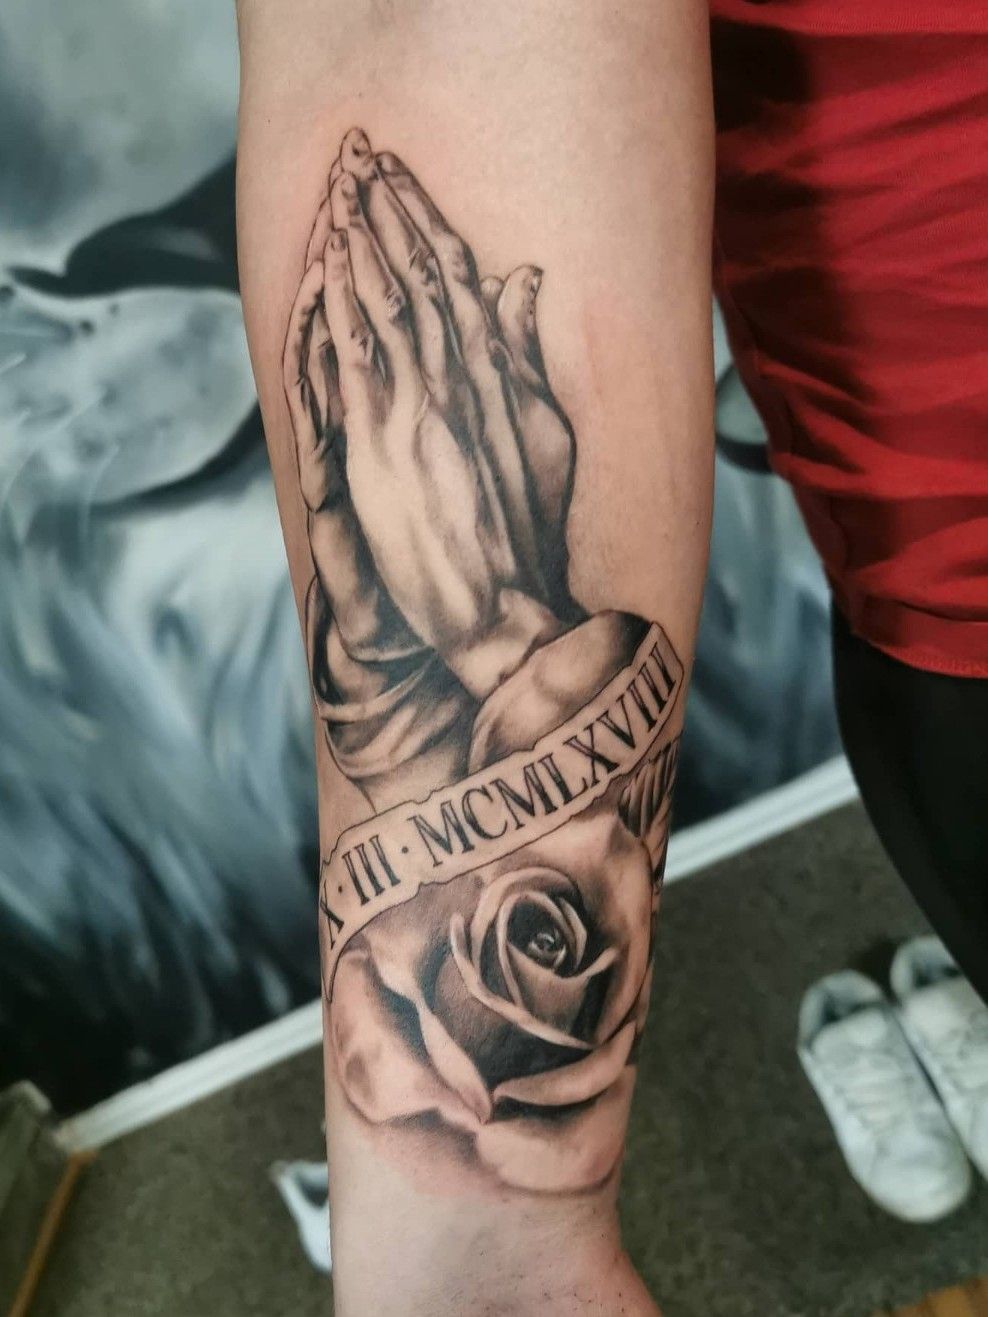 Forearm prayer hands tattoo with roses on Stylevore